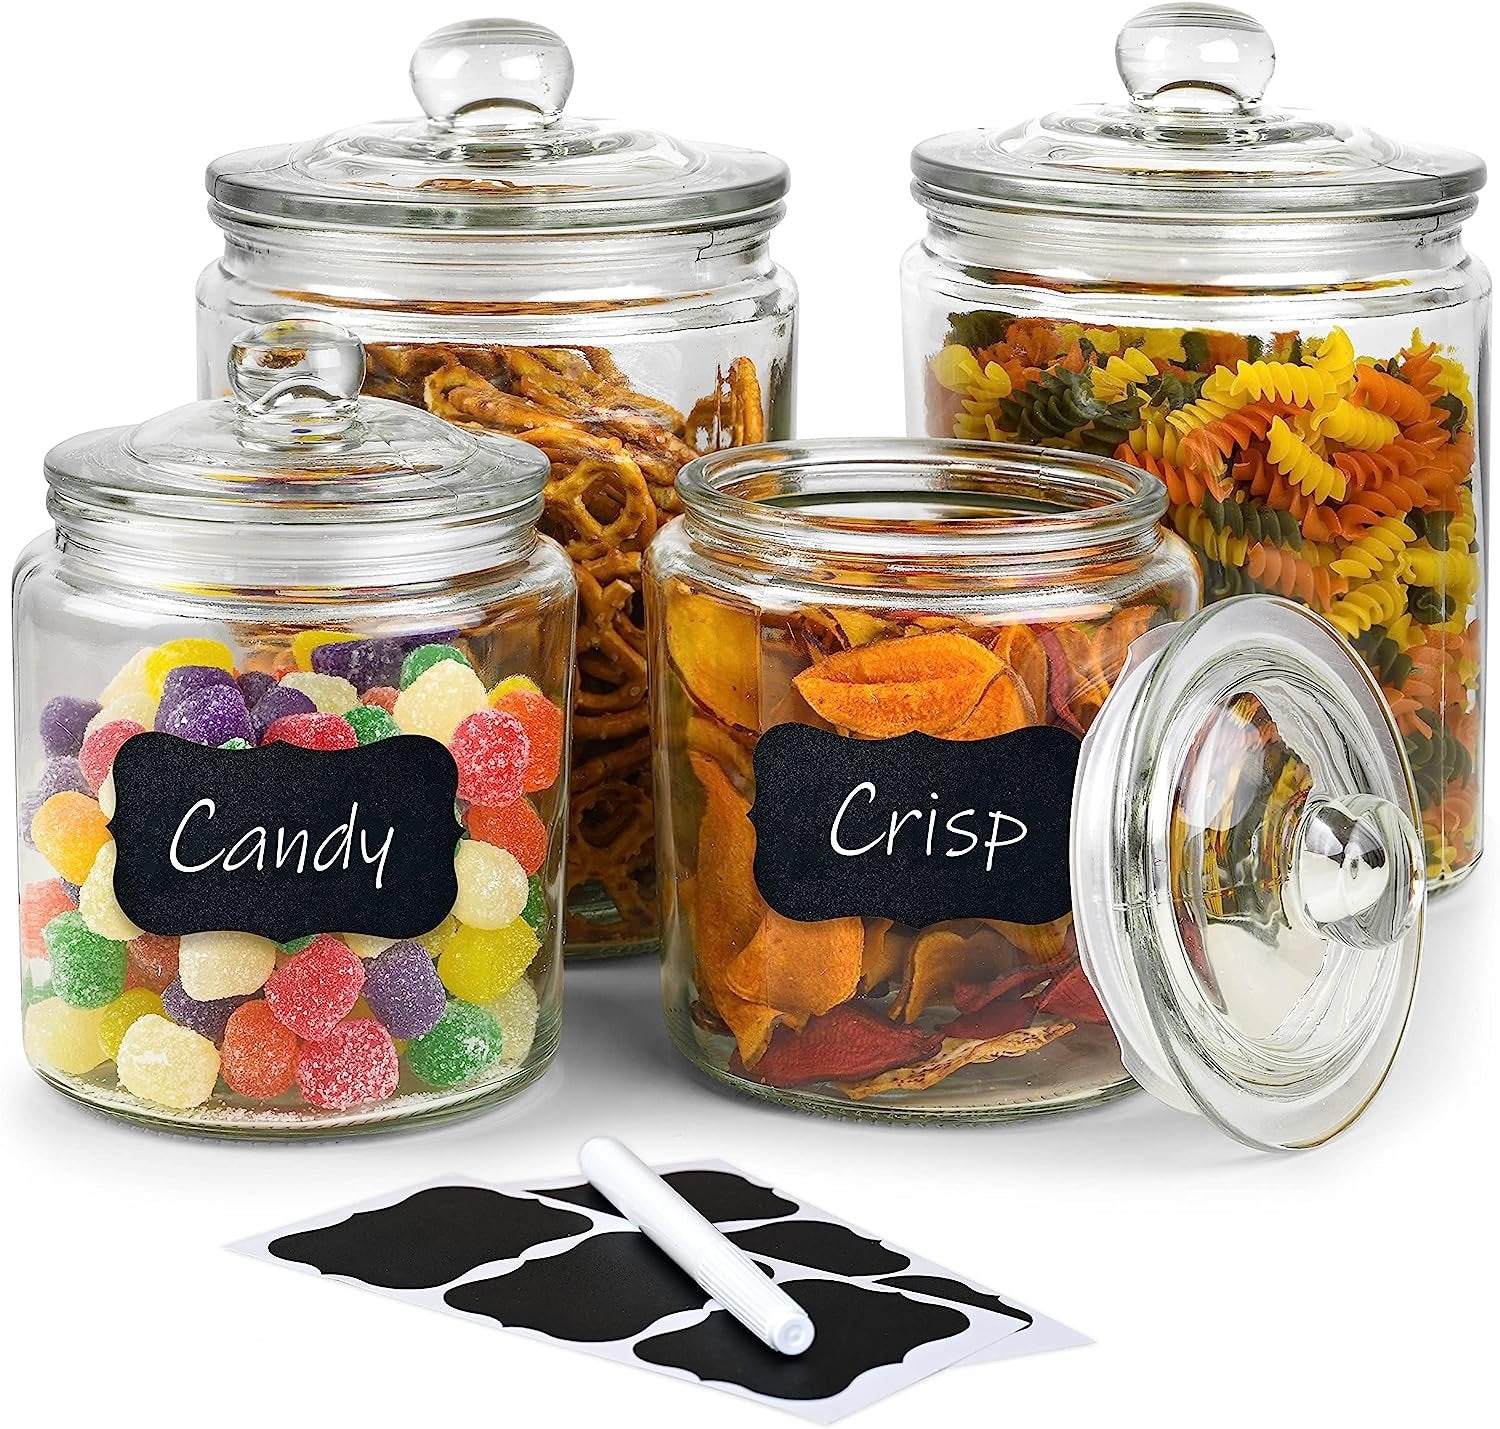 GADGETWIZ Glass Cookie Jar -2x 1/2 Gallon (64oz) & 1/4Gallon (32oz) - Glass Apothecary Jars With Lids - Canister Sets For Kitchen Counter - Glass Candy Jars - Glass Canisters Set Of 4